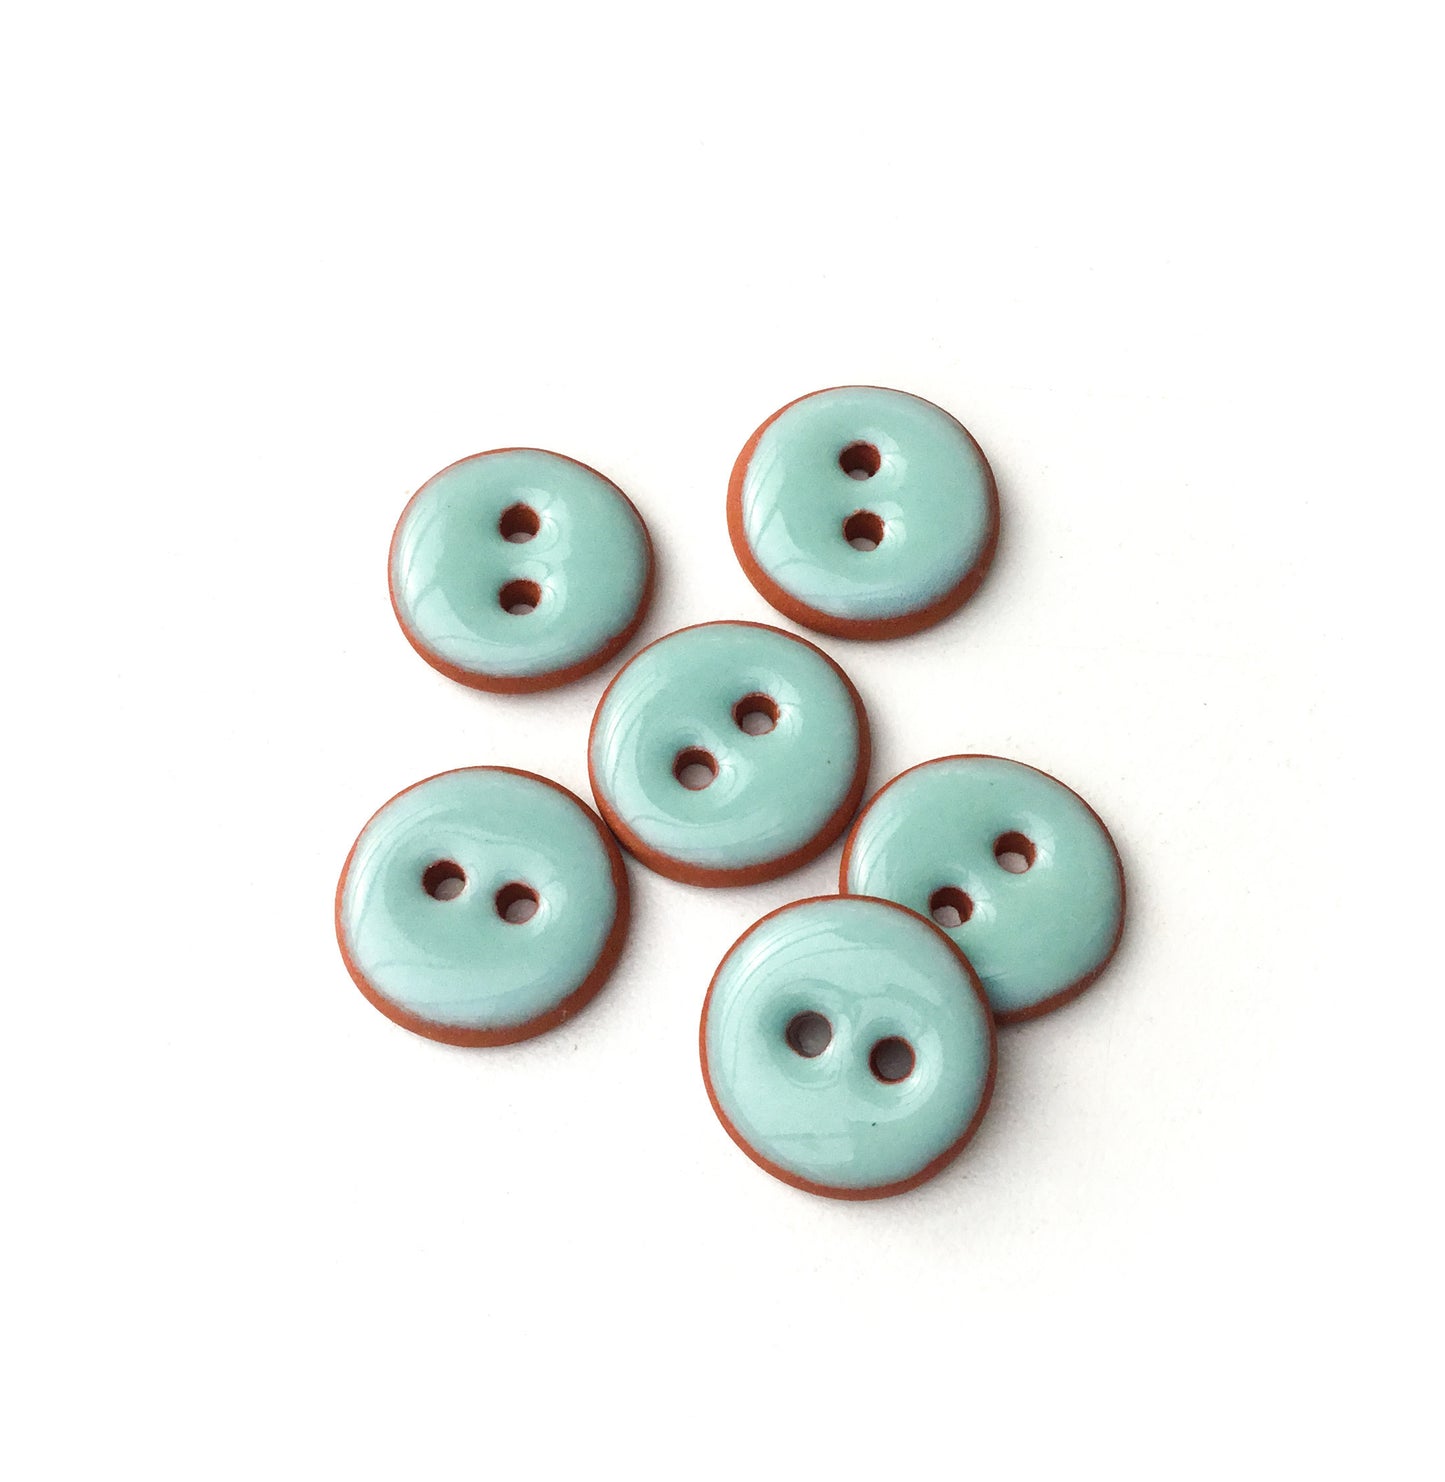 Light Turquoise Clay Buttons - 5/8"